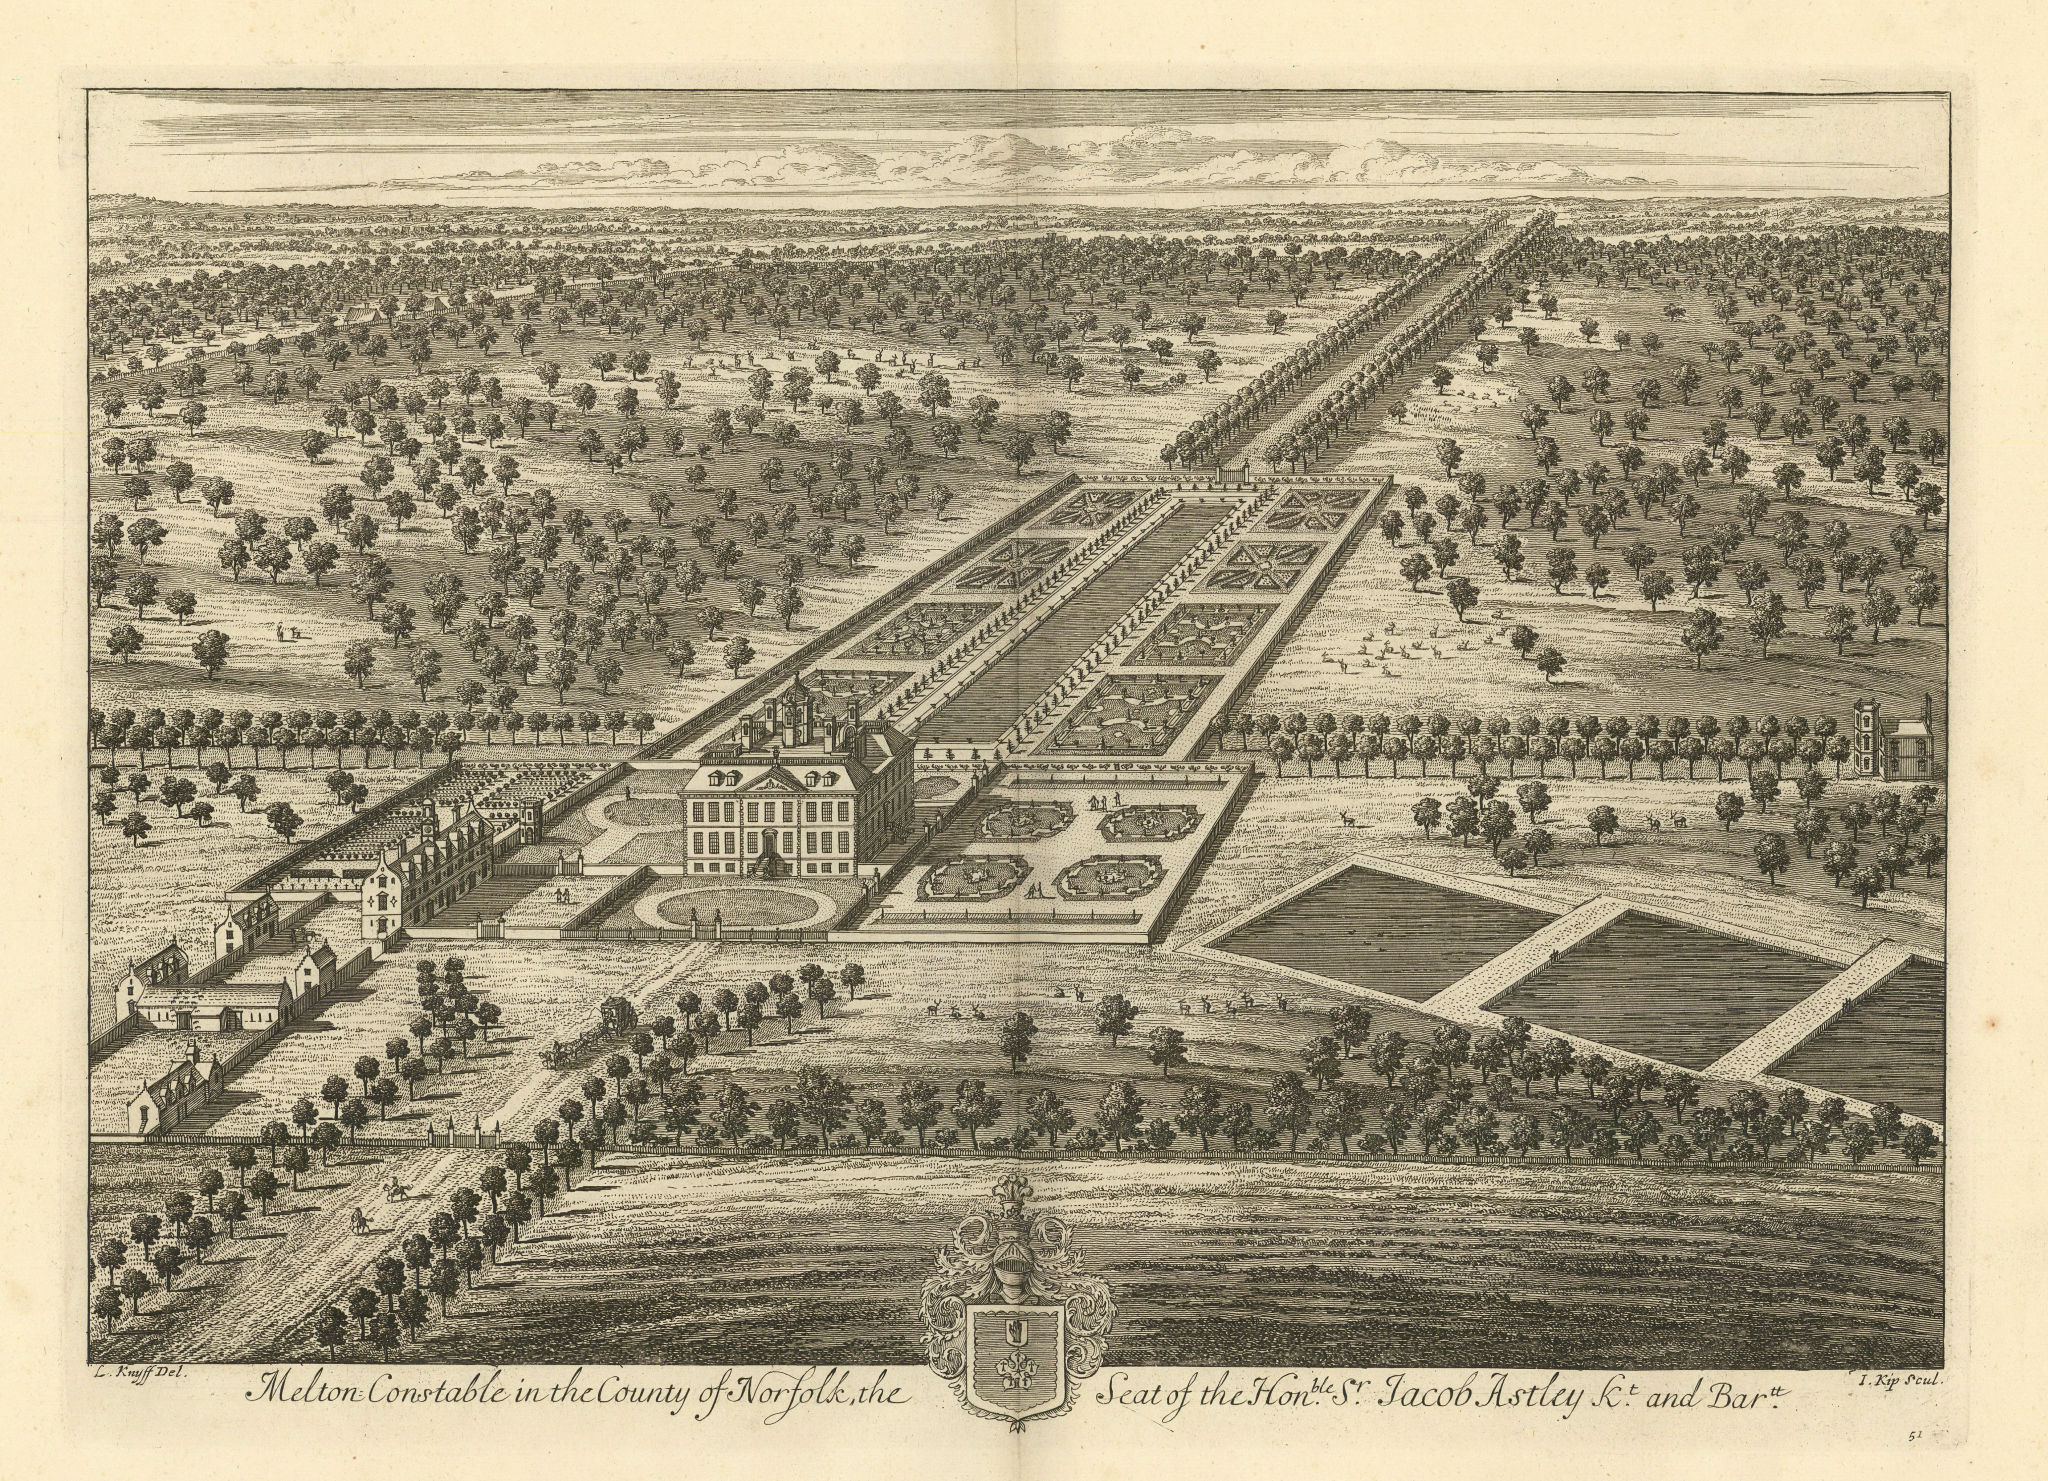 Associate Product "Melton Constable [Hall] in the County of Norfolk" by Kip & Knyff 1709 print